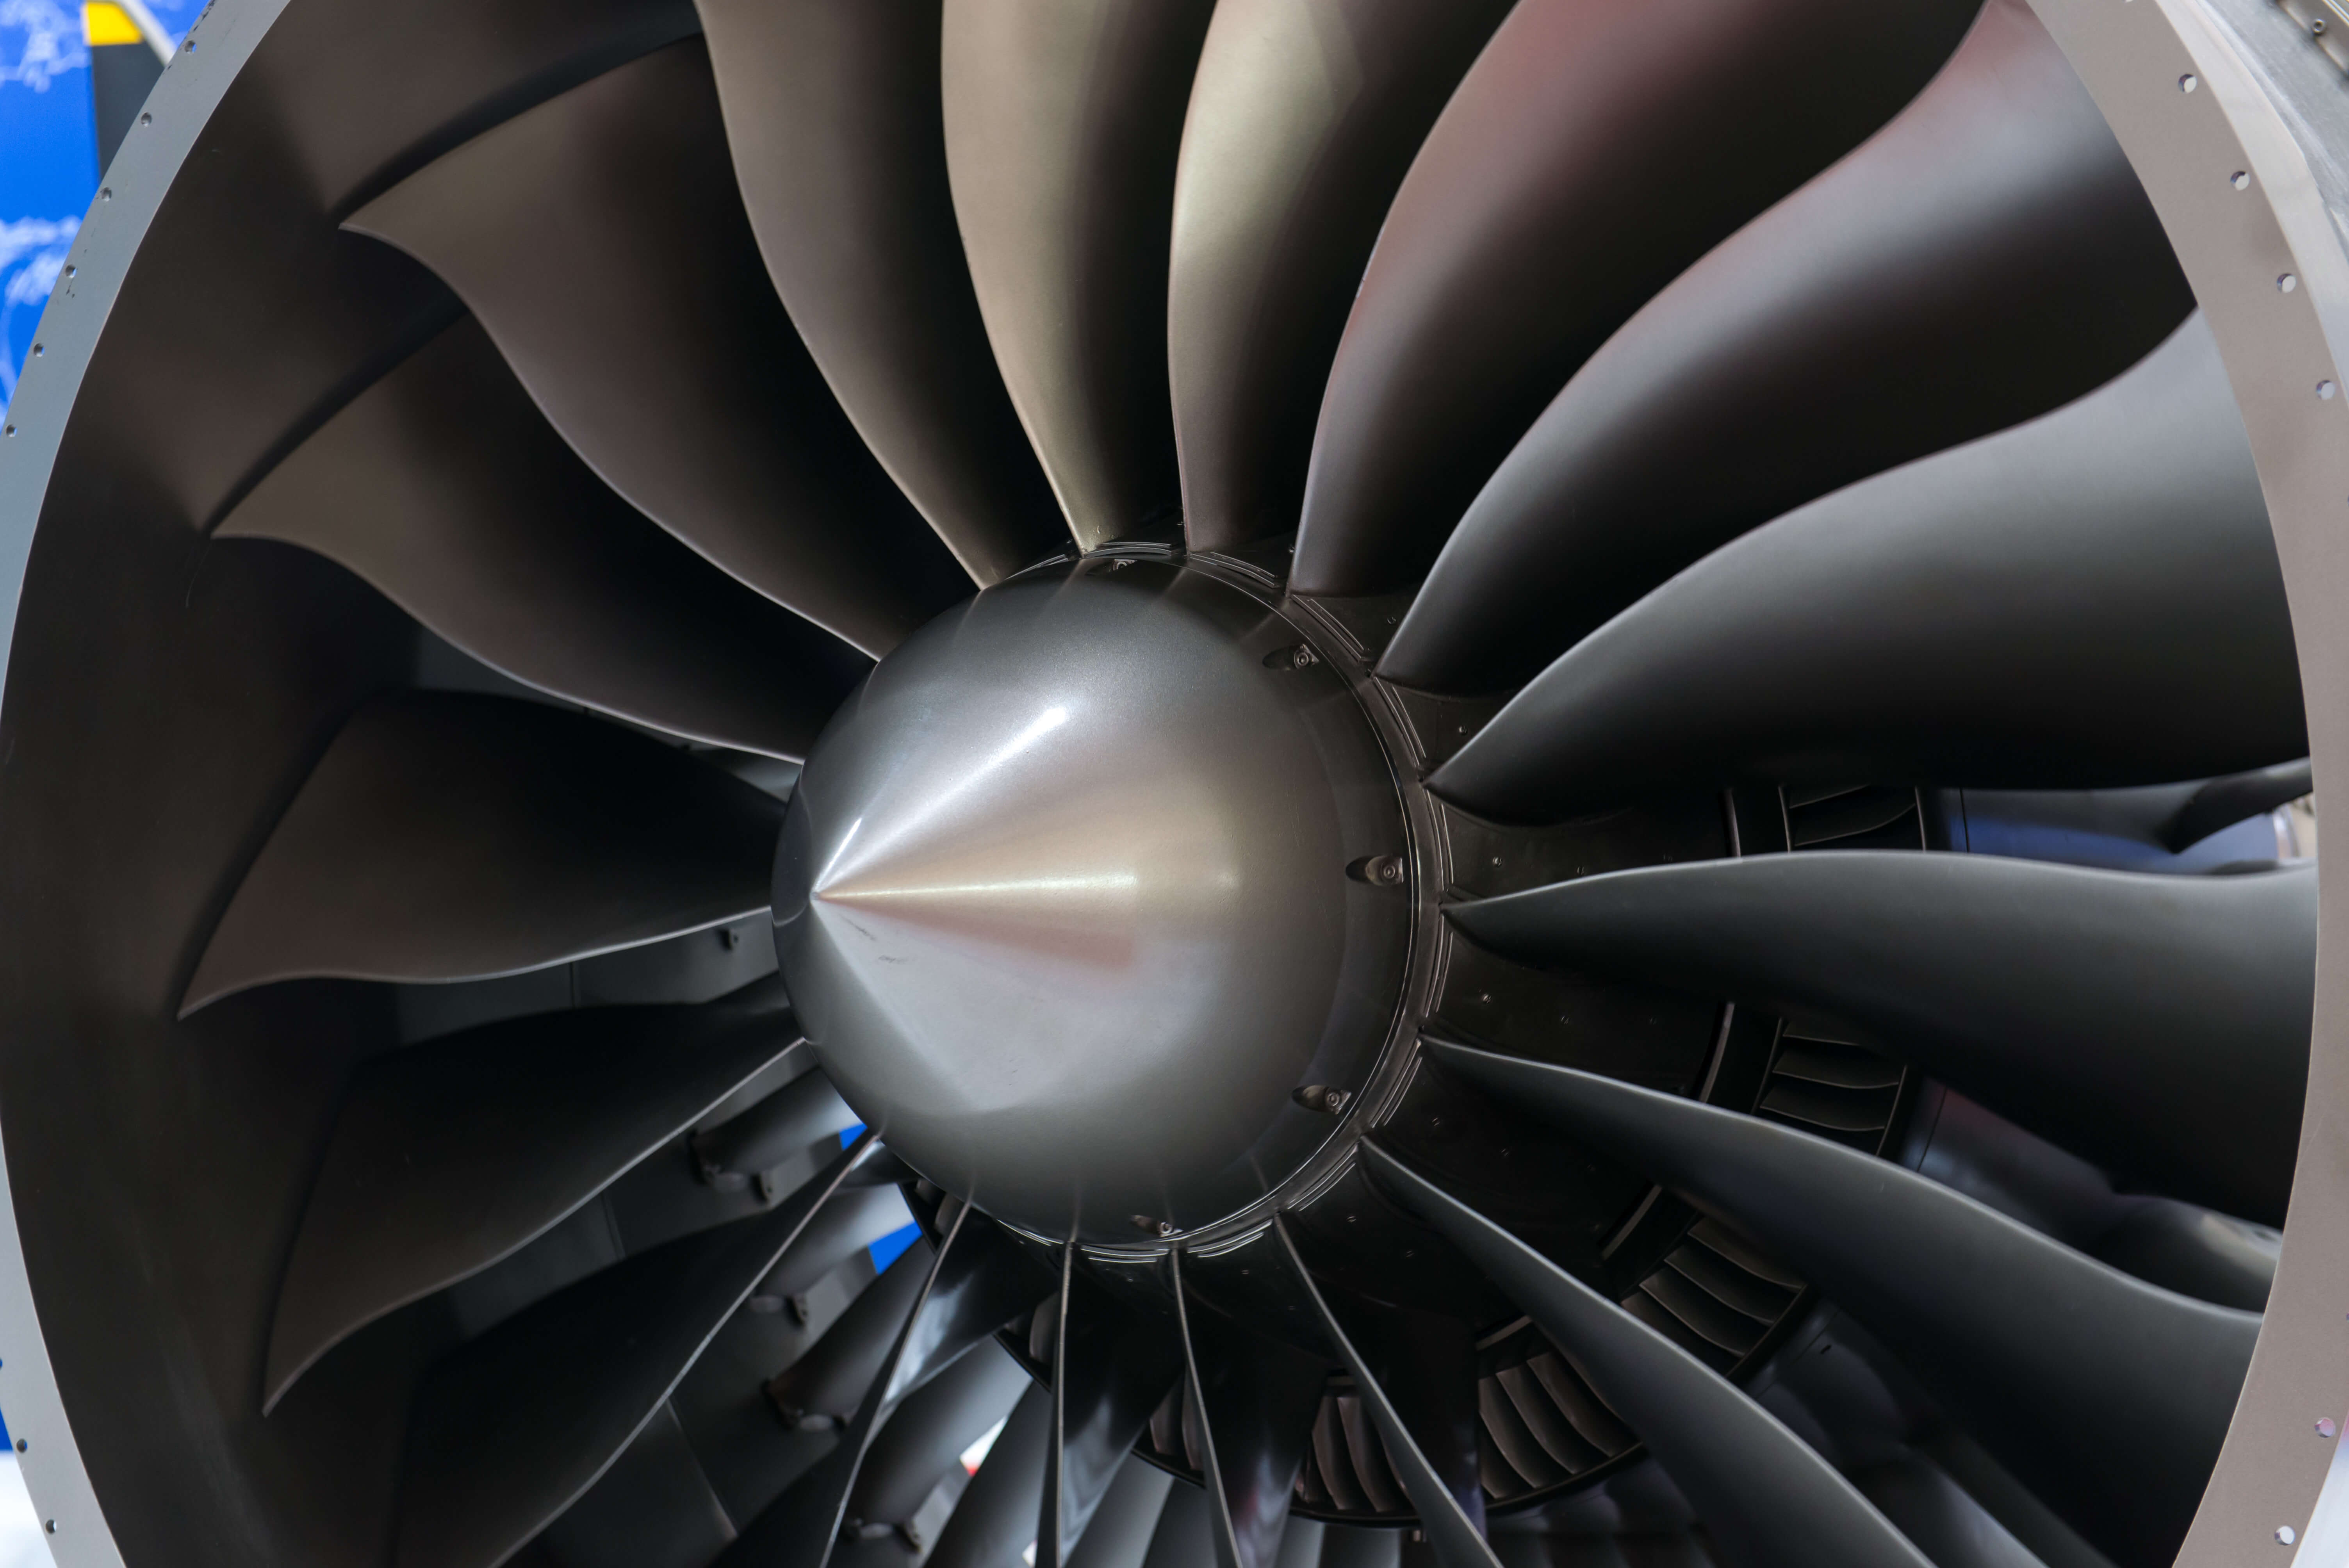 An Update on Our Aerospace Certifications and Quality Assurance Efforts